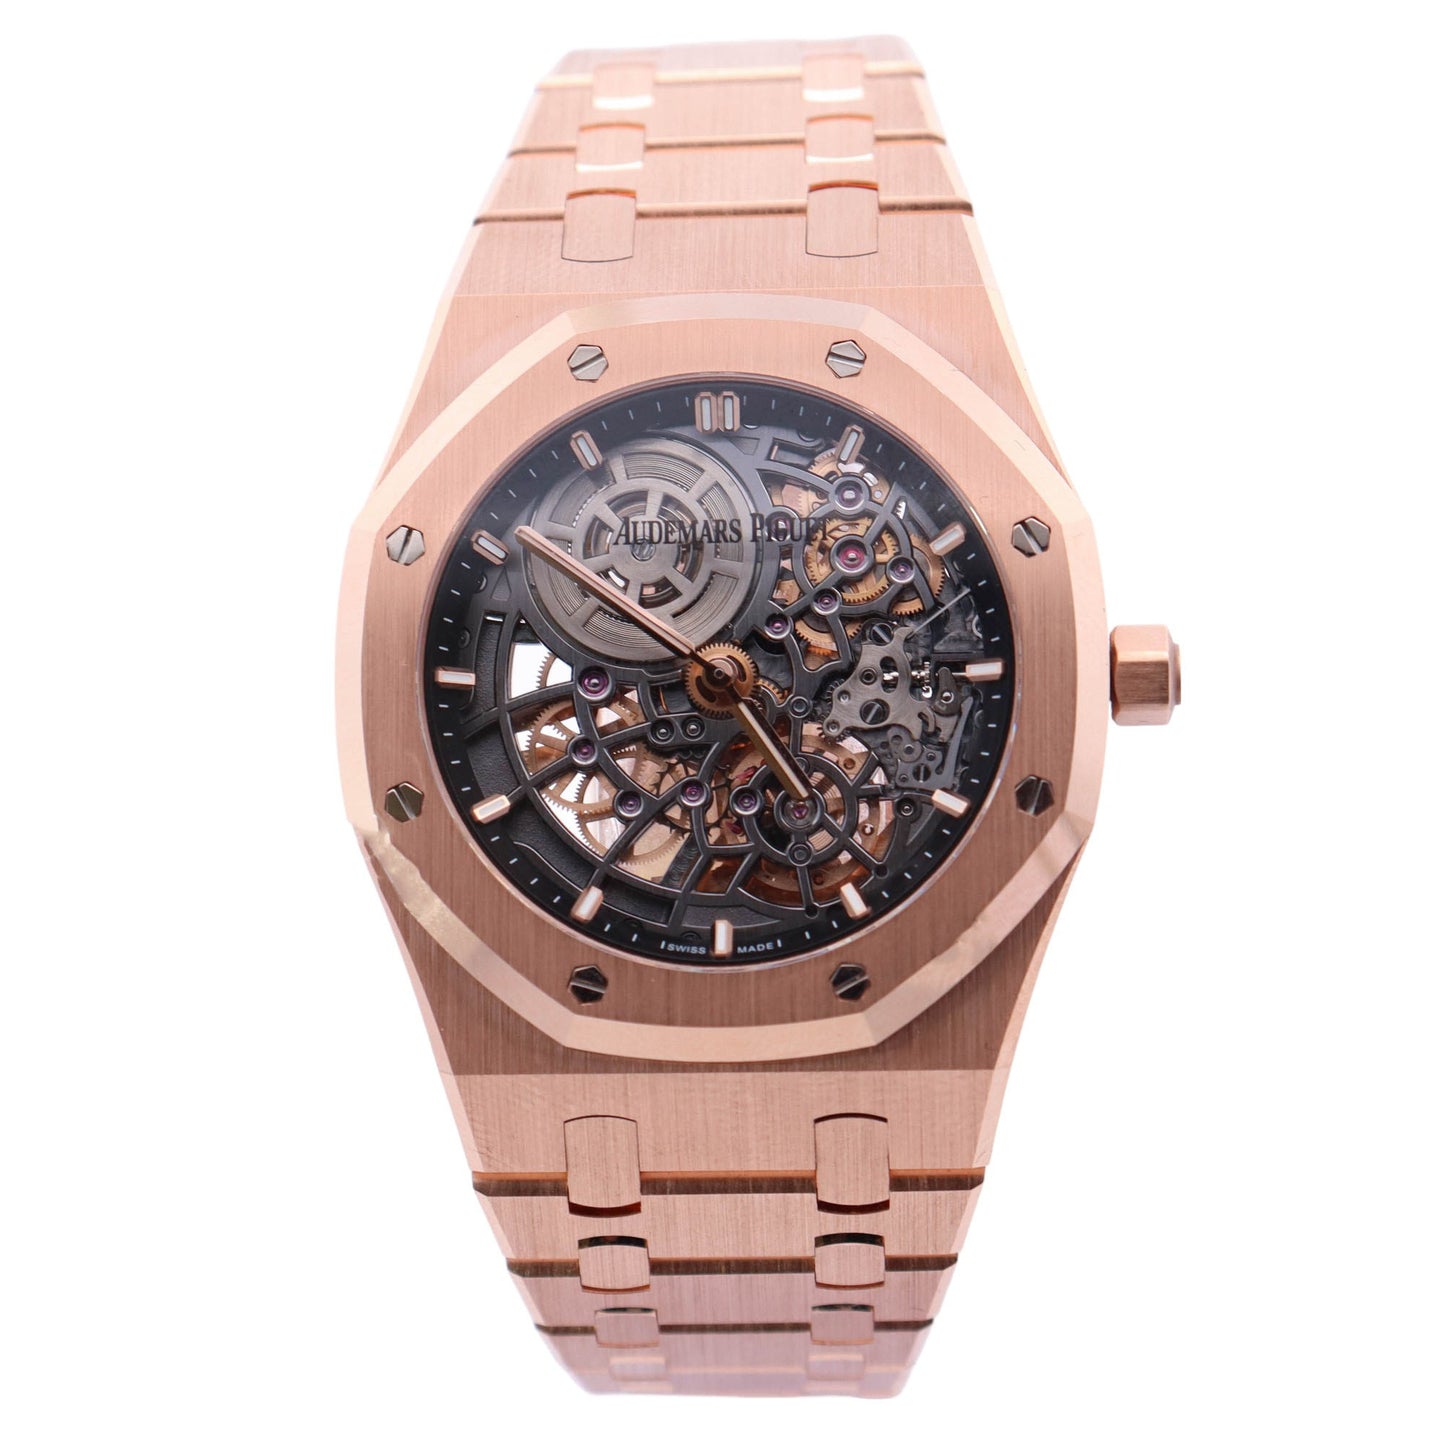 Audemars Piguet Royal Oak Jumbo Extra-Thin Openworked "50th Anniversary" Rose Gold 39mm Openwork Stcik Dial Watch Ref# 16204OR.OO.1240OR.01